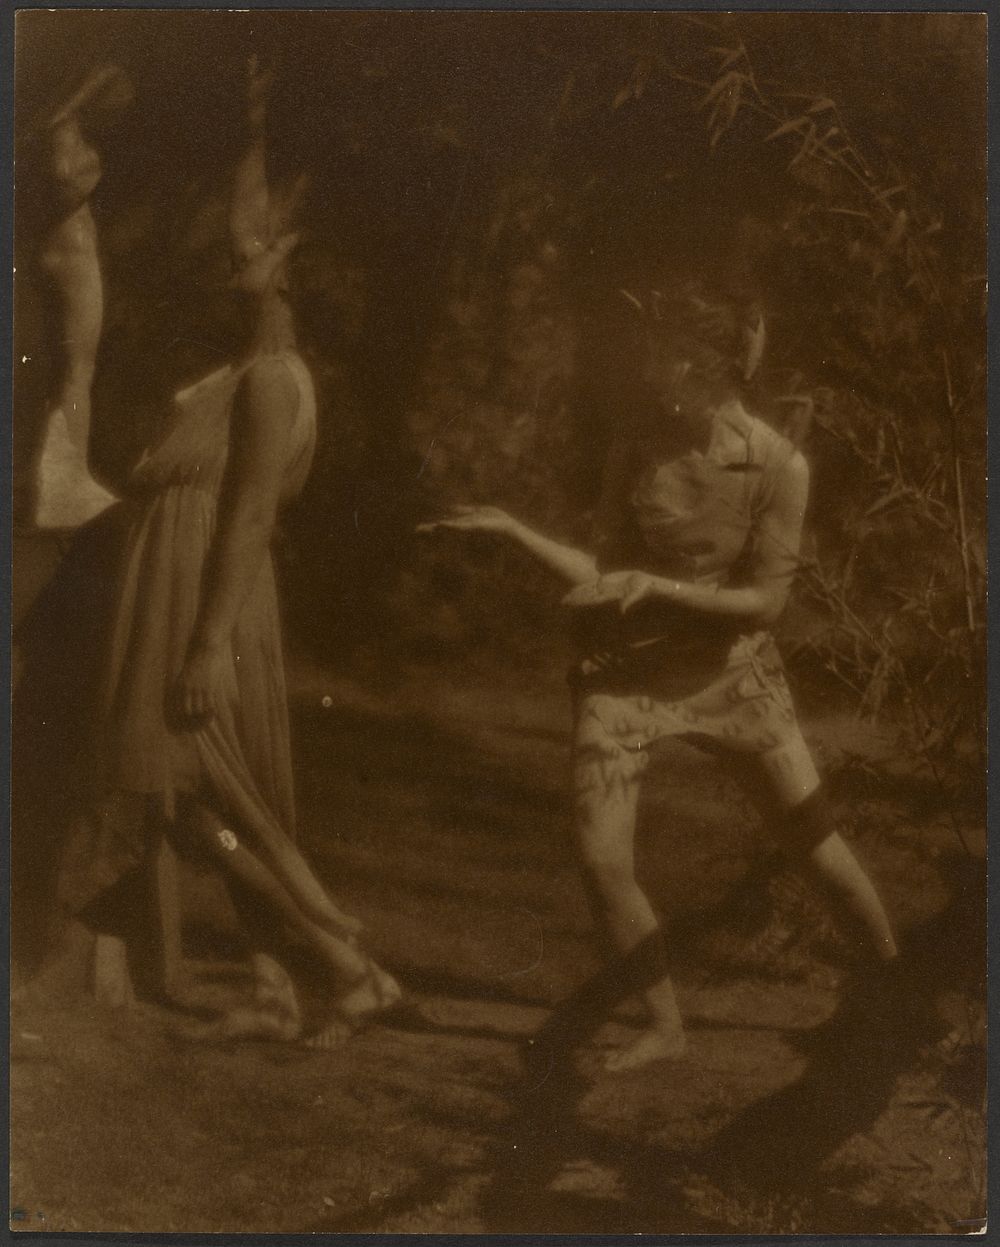 Dancers in a Pose by Louis Fleckenstein